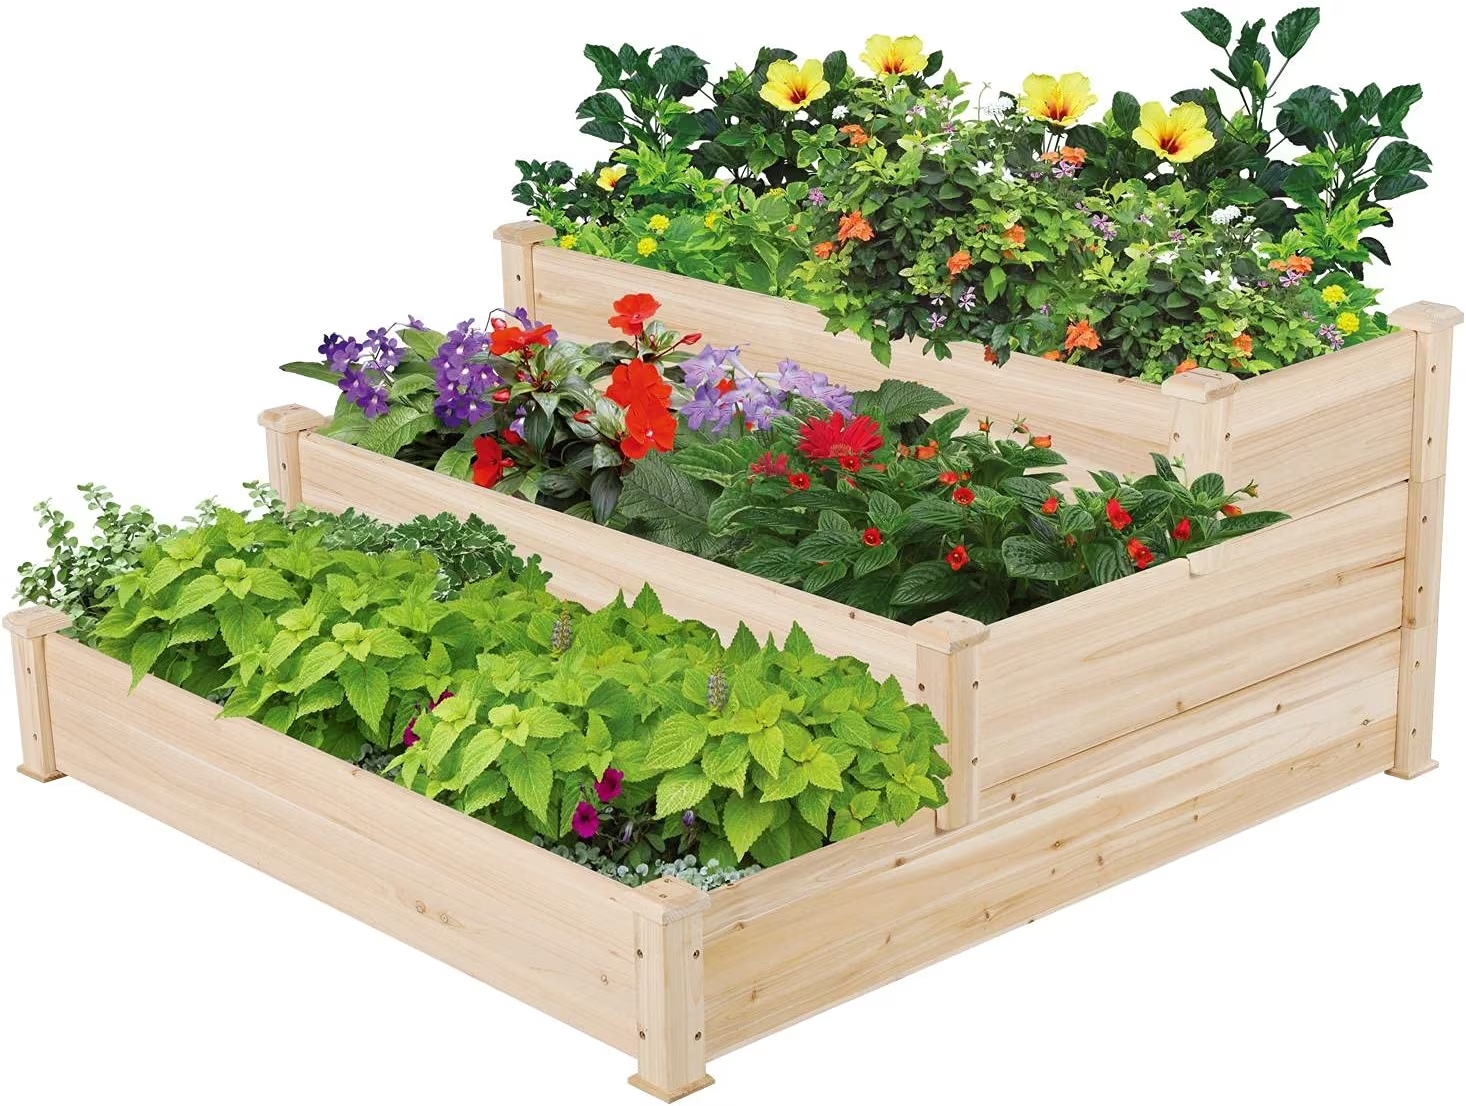 Yaheetech 3 Tier Raised Garden Bed Wooden Plant Raised Bed Elevated Planter Box Kit